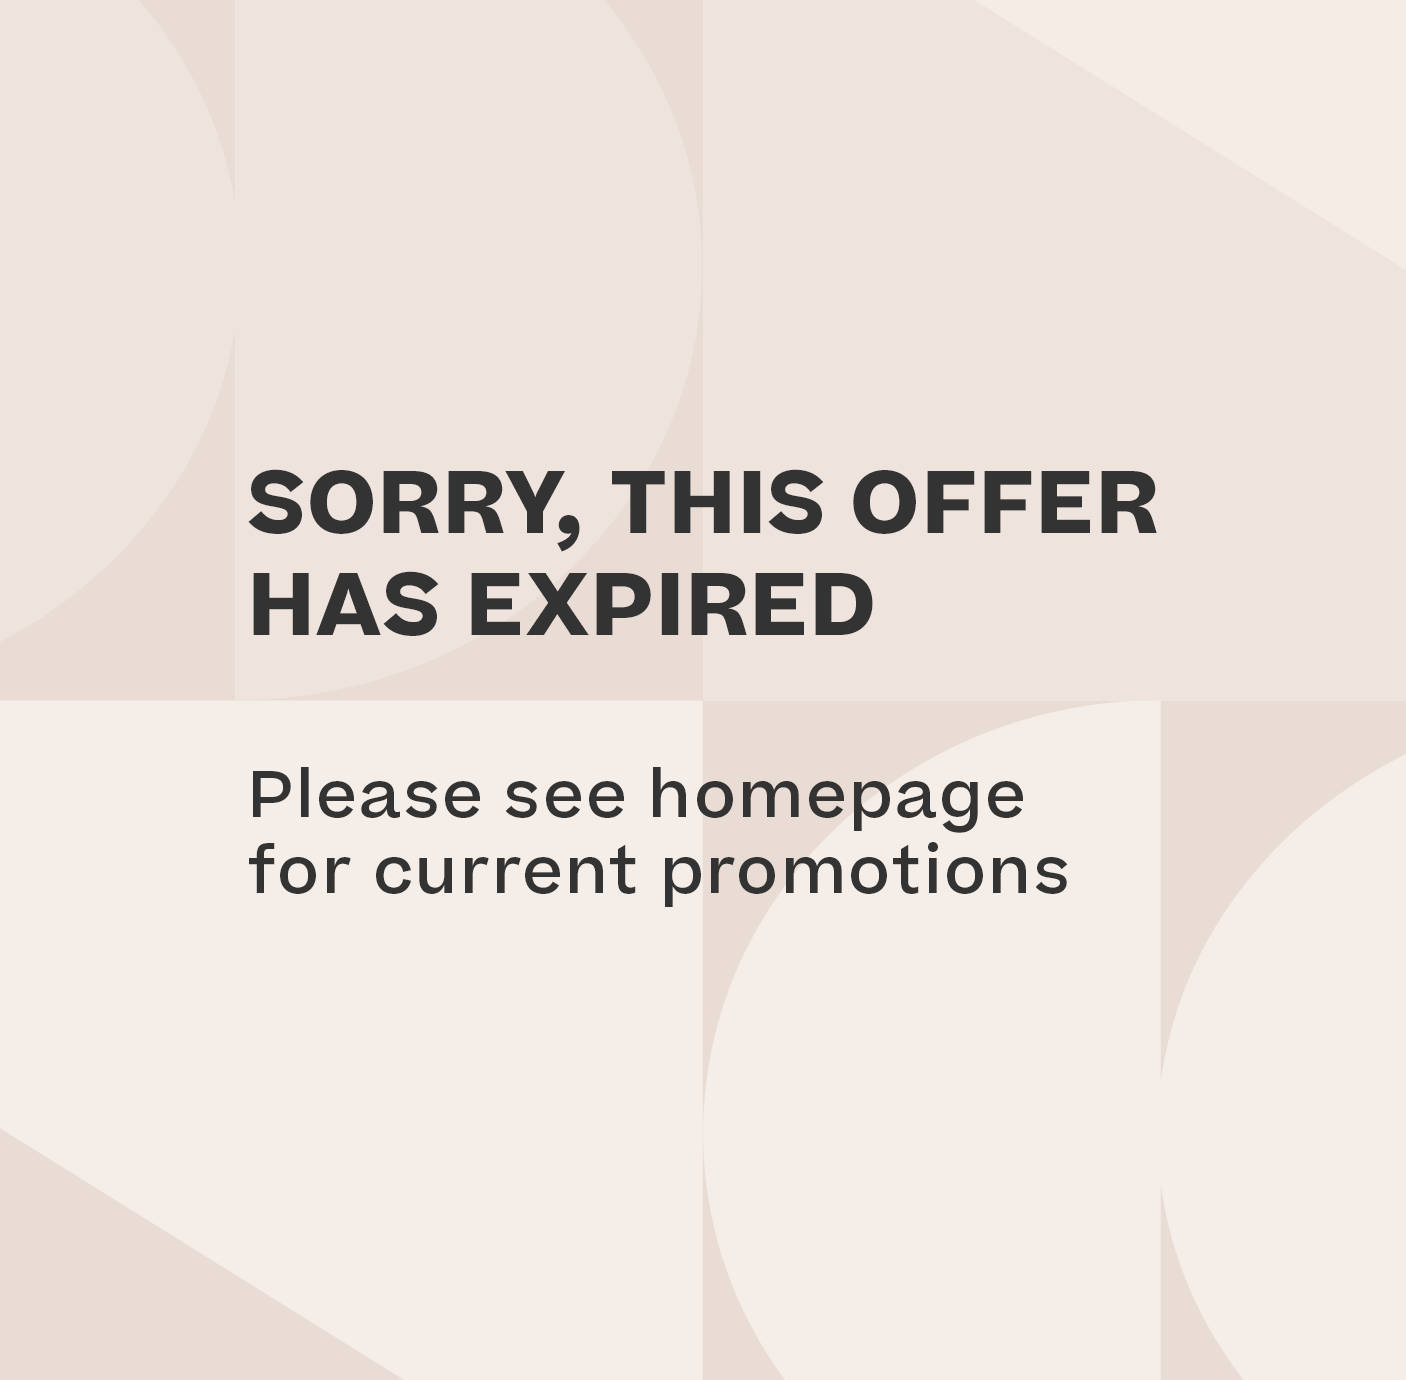 Expired Go to Homepage for Current Promotions